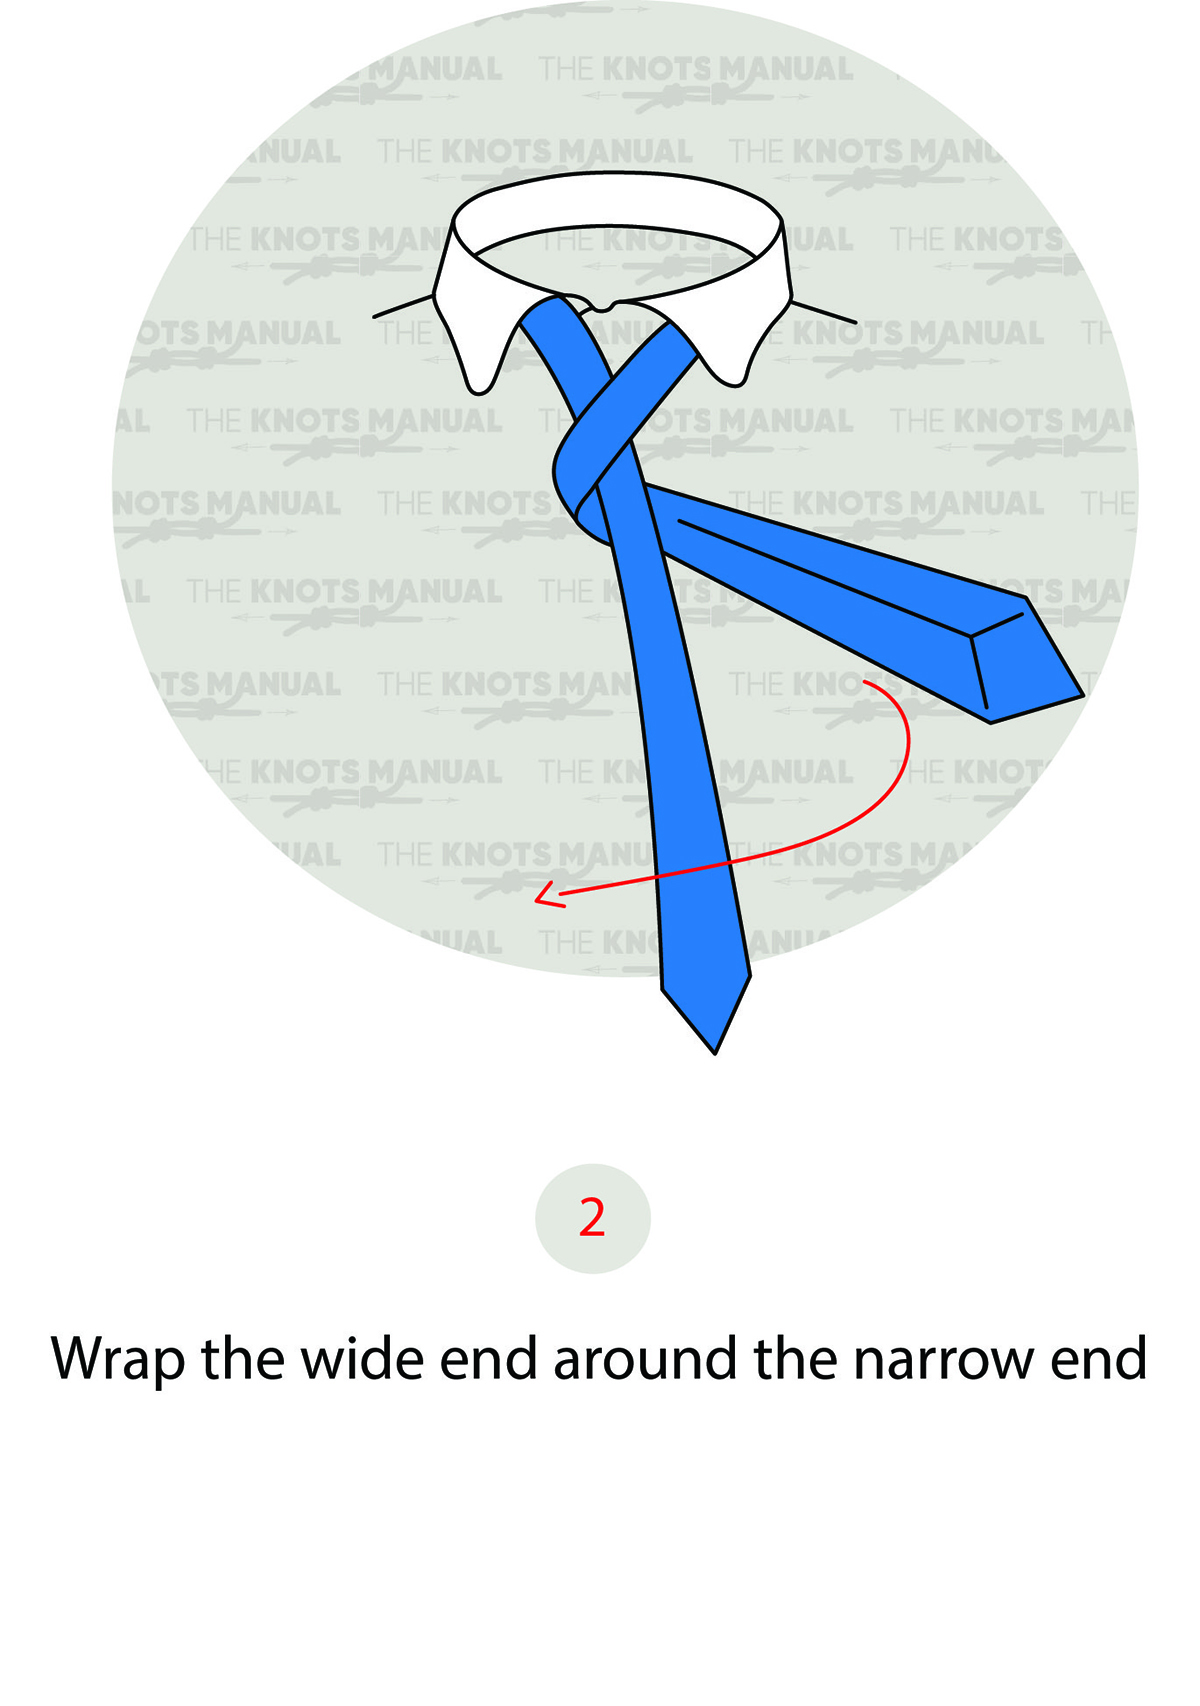 Step-By-Step Guide: How to Tie the Four-In-Hand Tie Knot